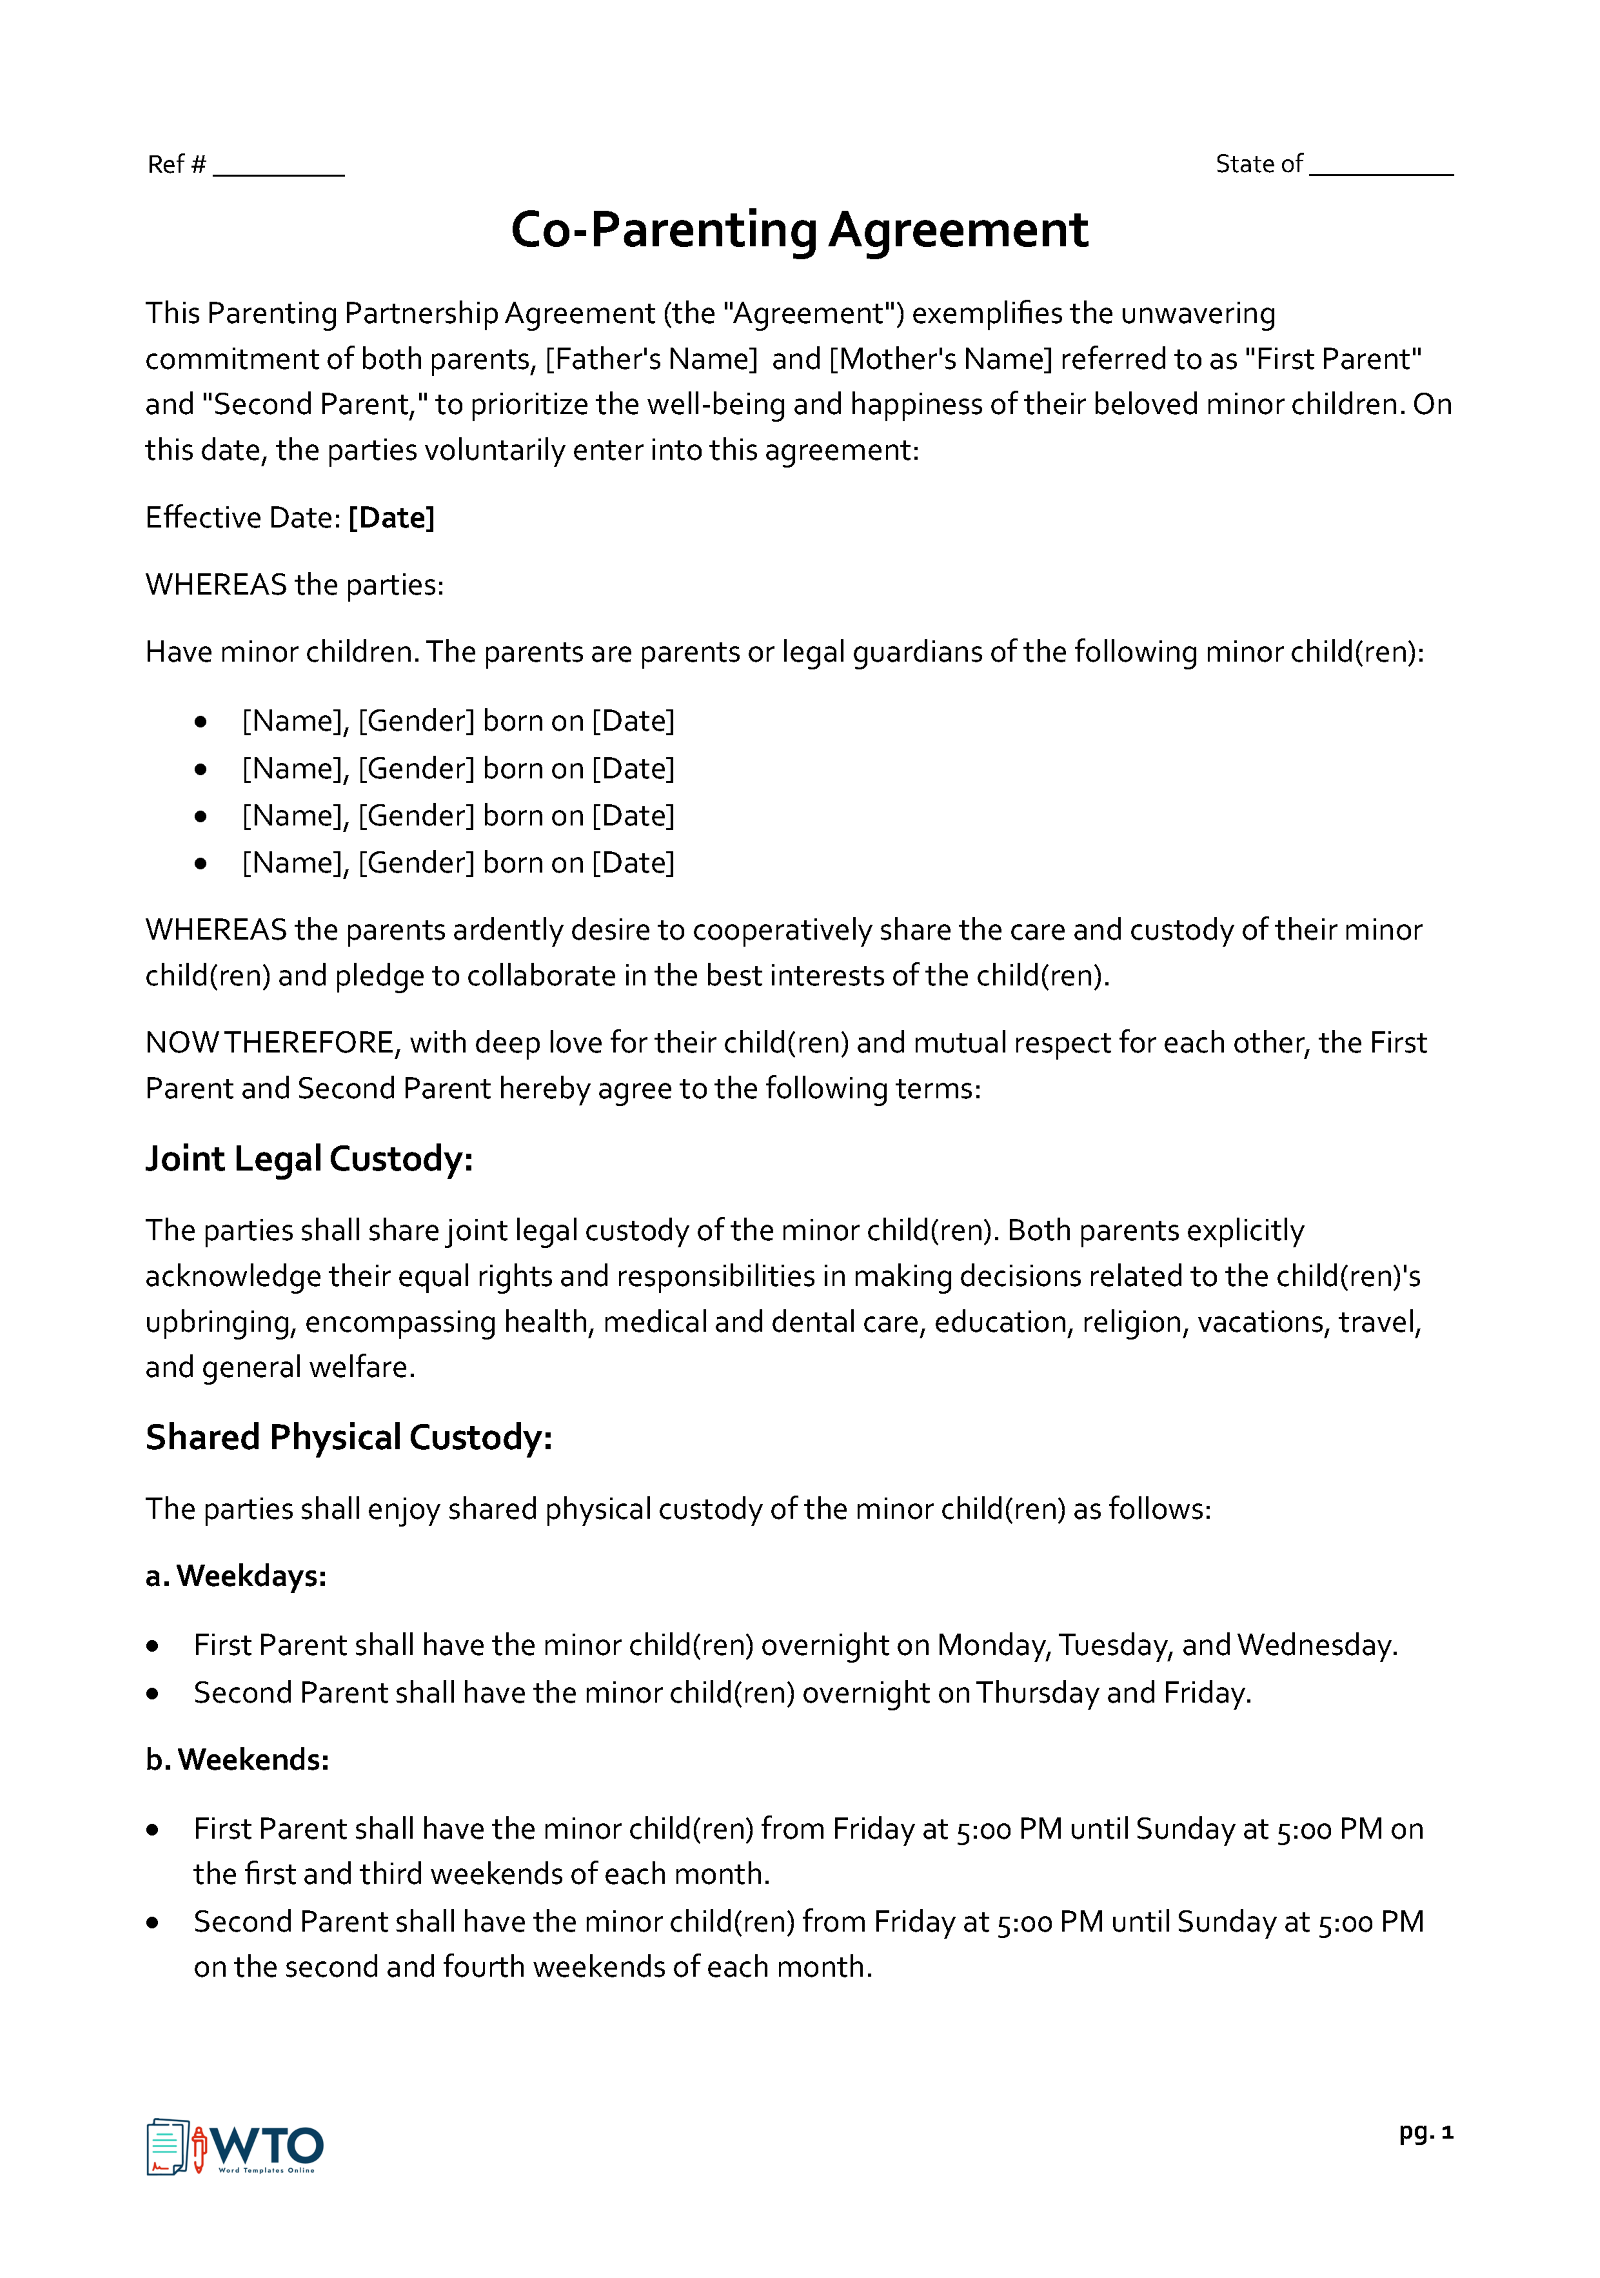 Co-Parenting Agreement Template for Shared Custody